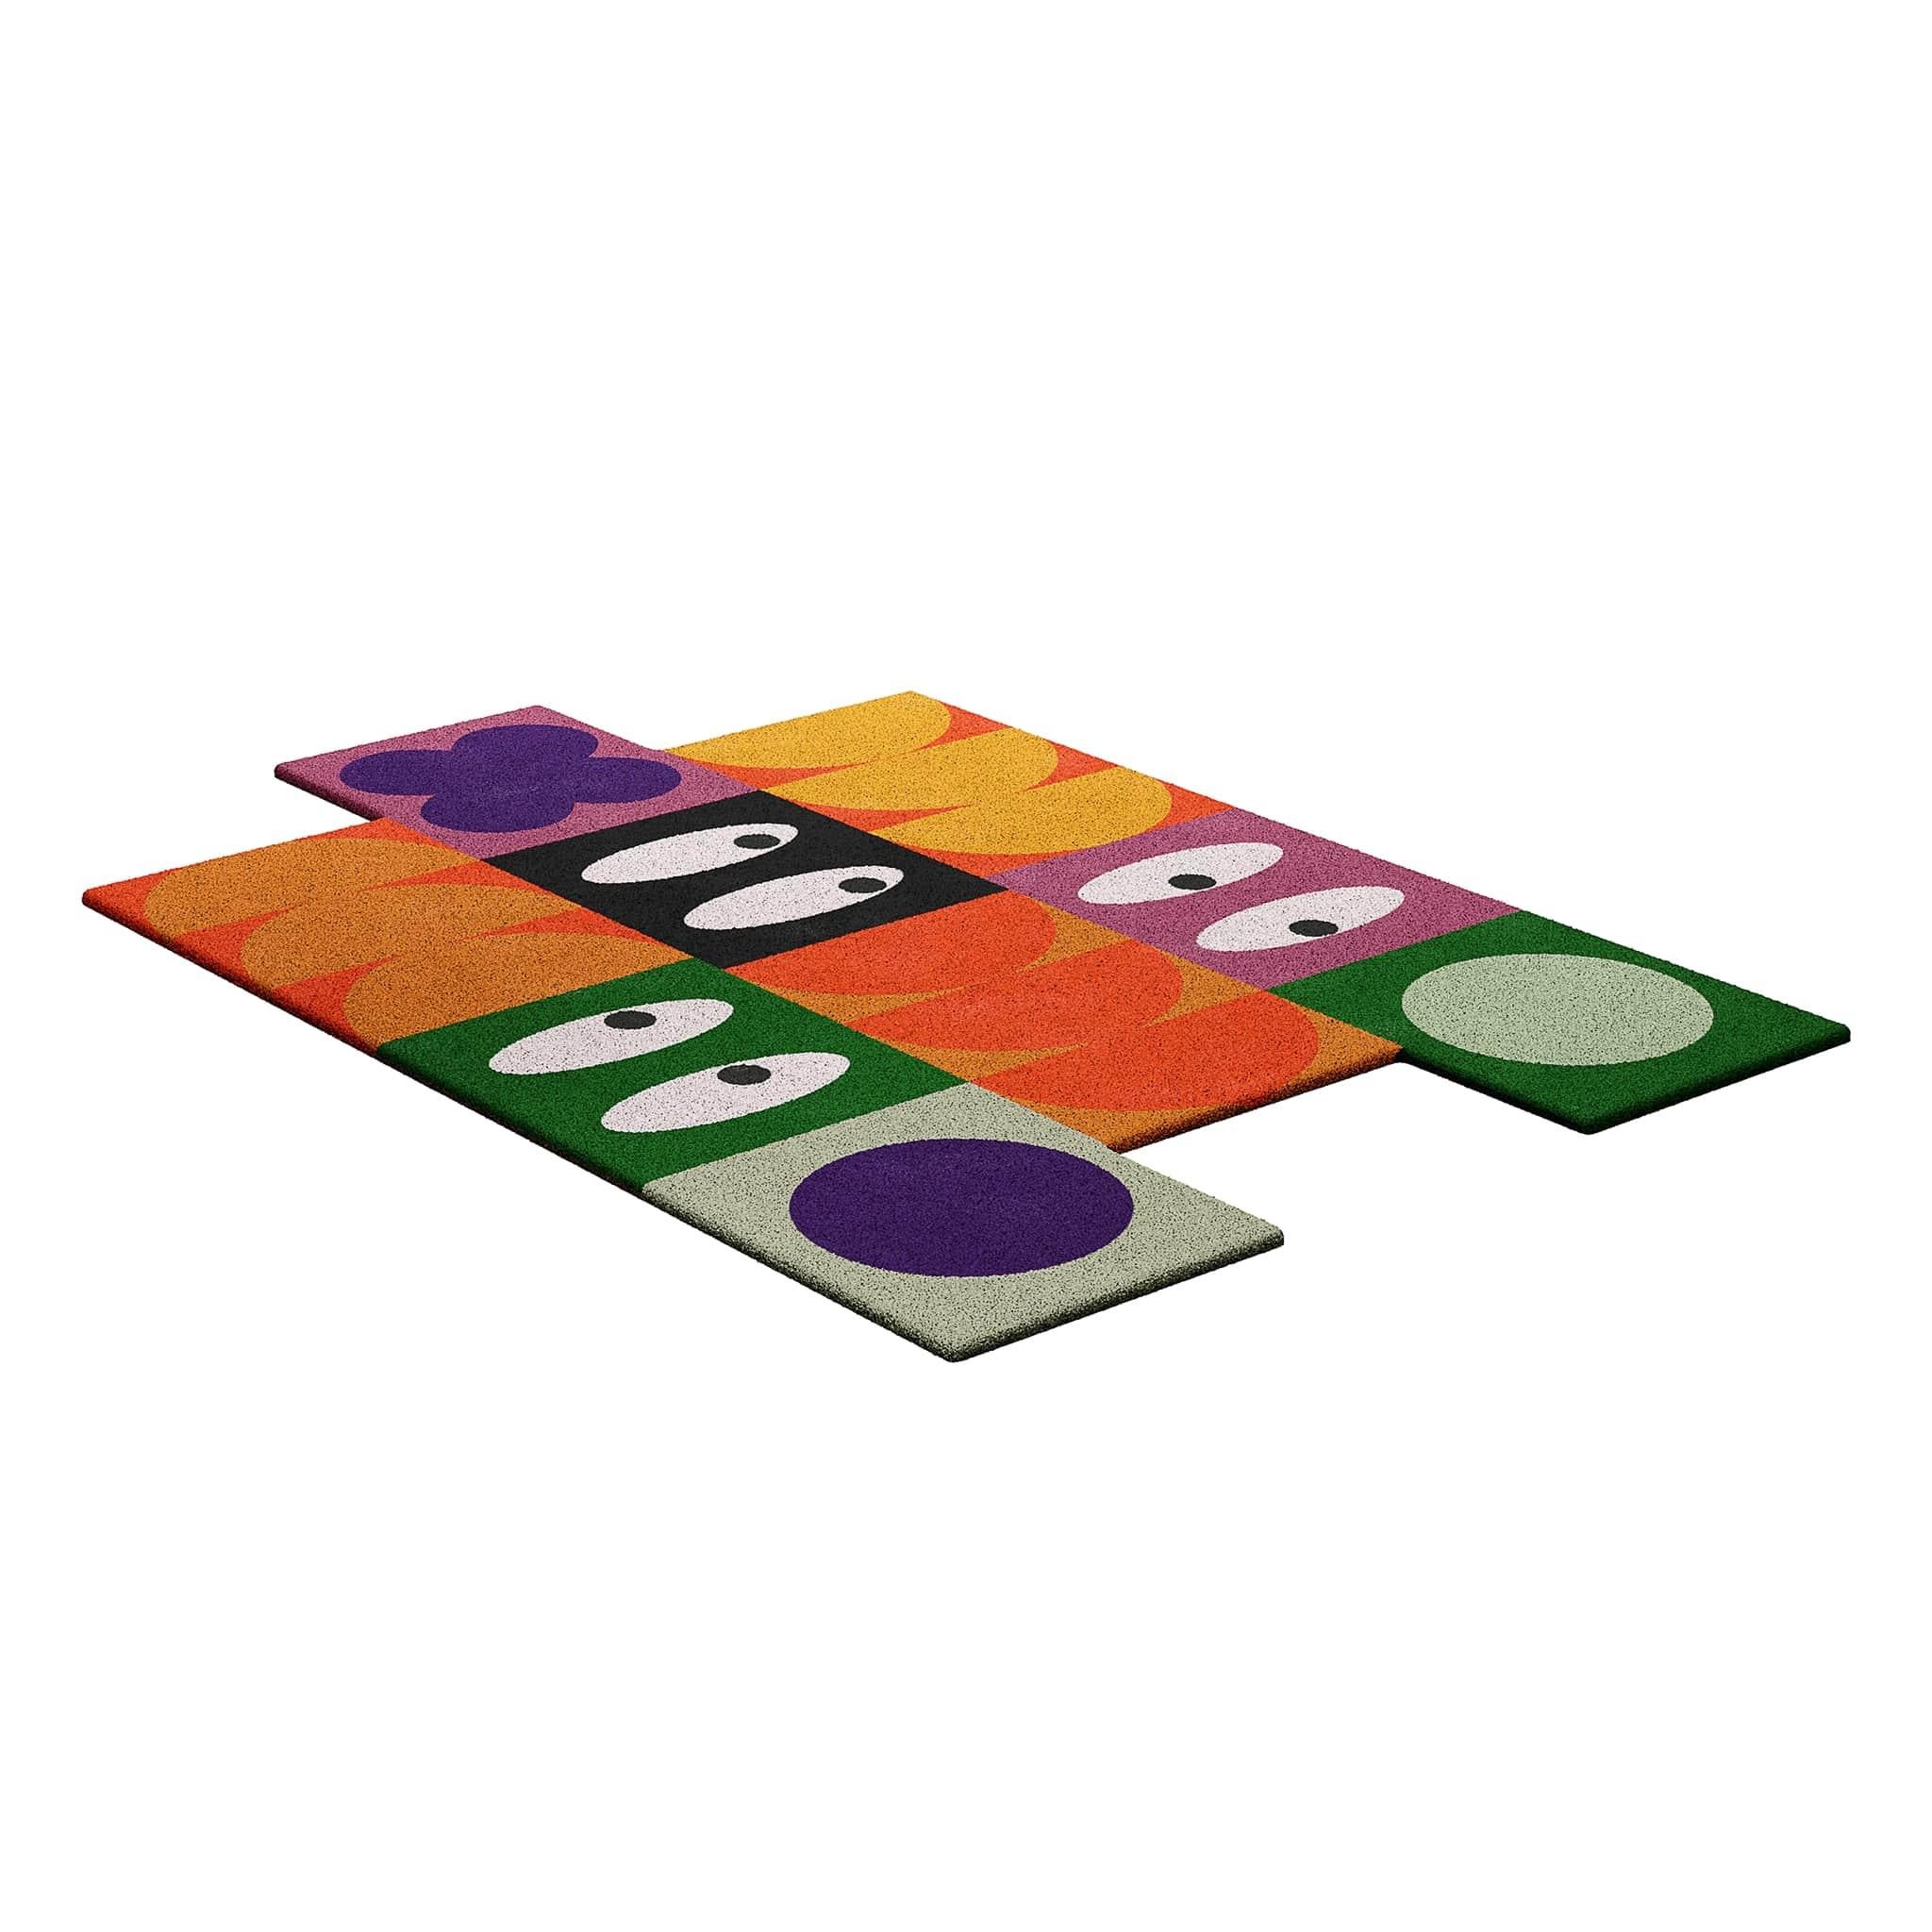 Tapis Kids #018 is a fun rug for playful and creative moments. It was made to be enjoyed with your loved ones, creating happy memories that will last a lifetime. 

Handcrafted with Wool, an environmentally friendly material, this kid rug was made